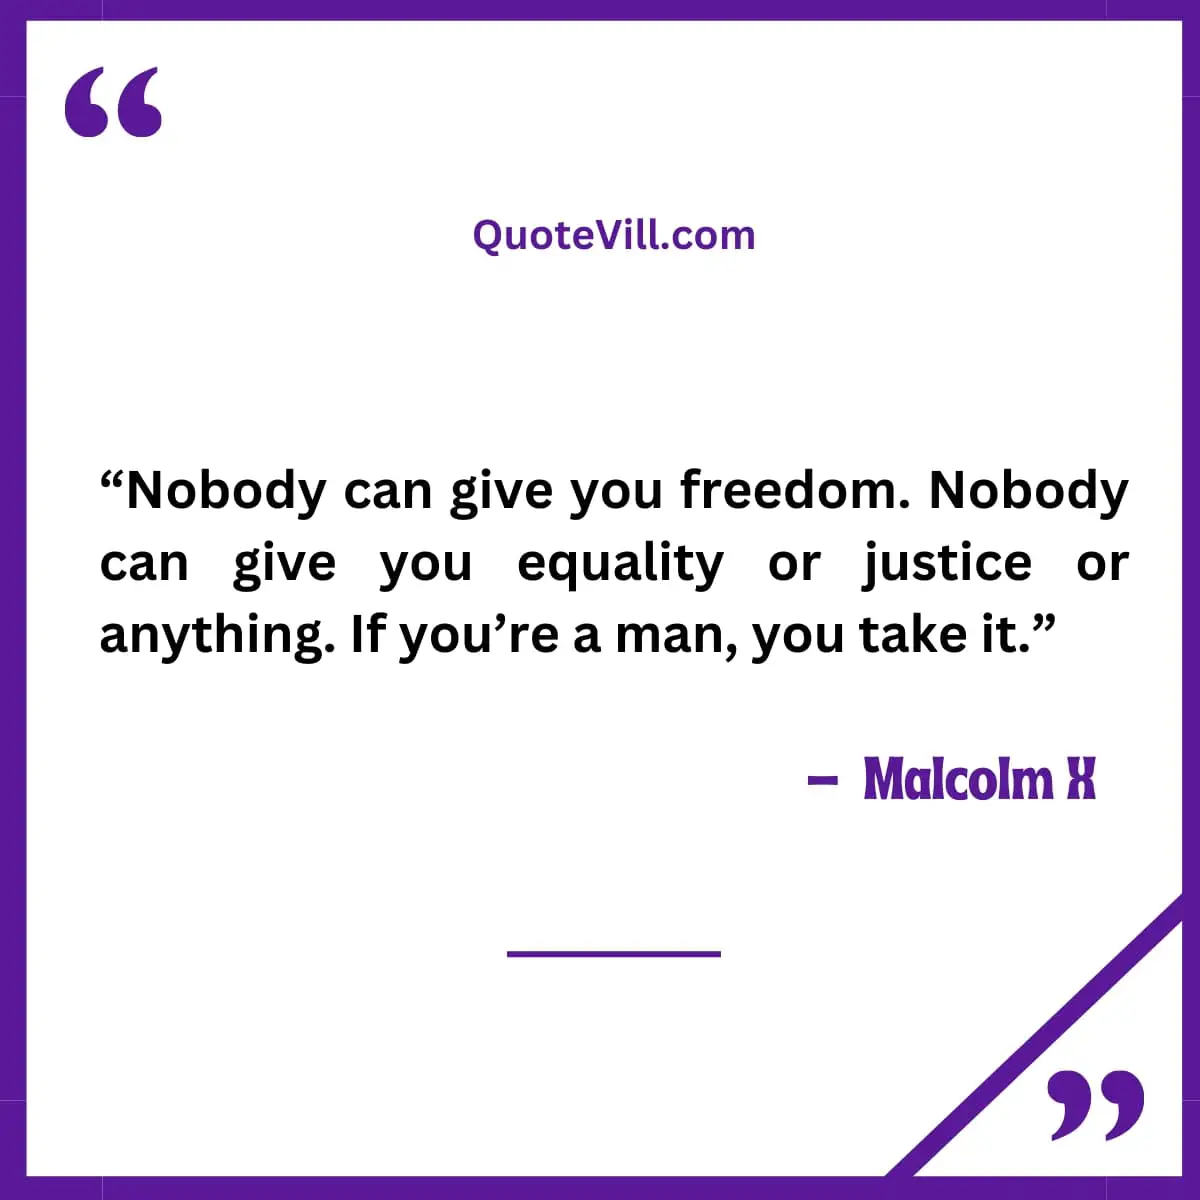 Malcolm X Quotes On Freedom